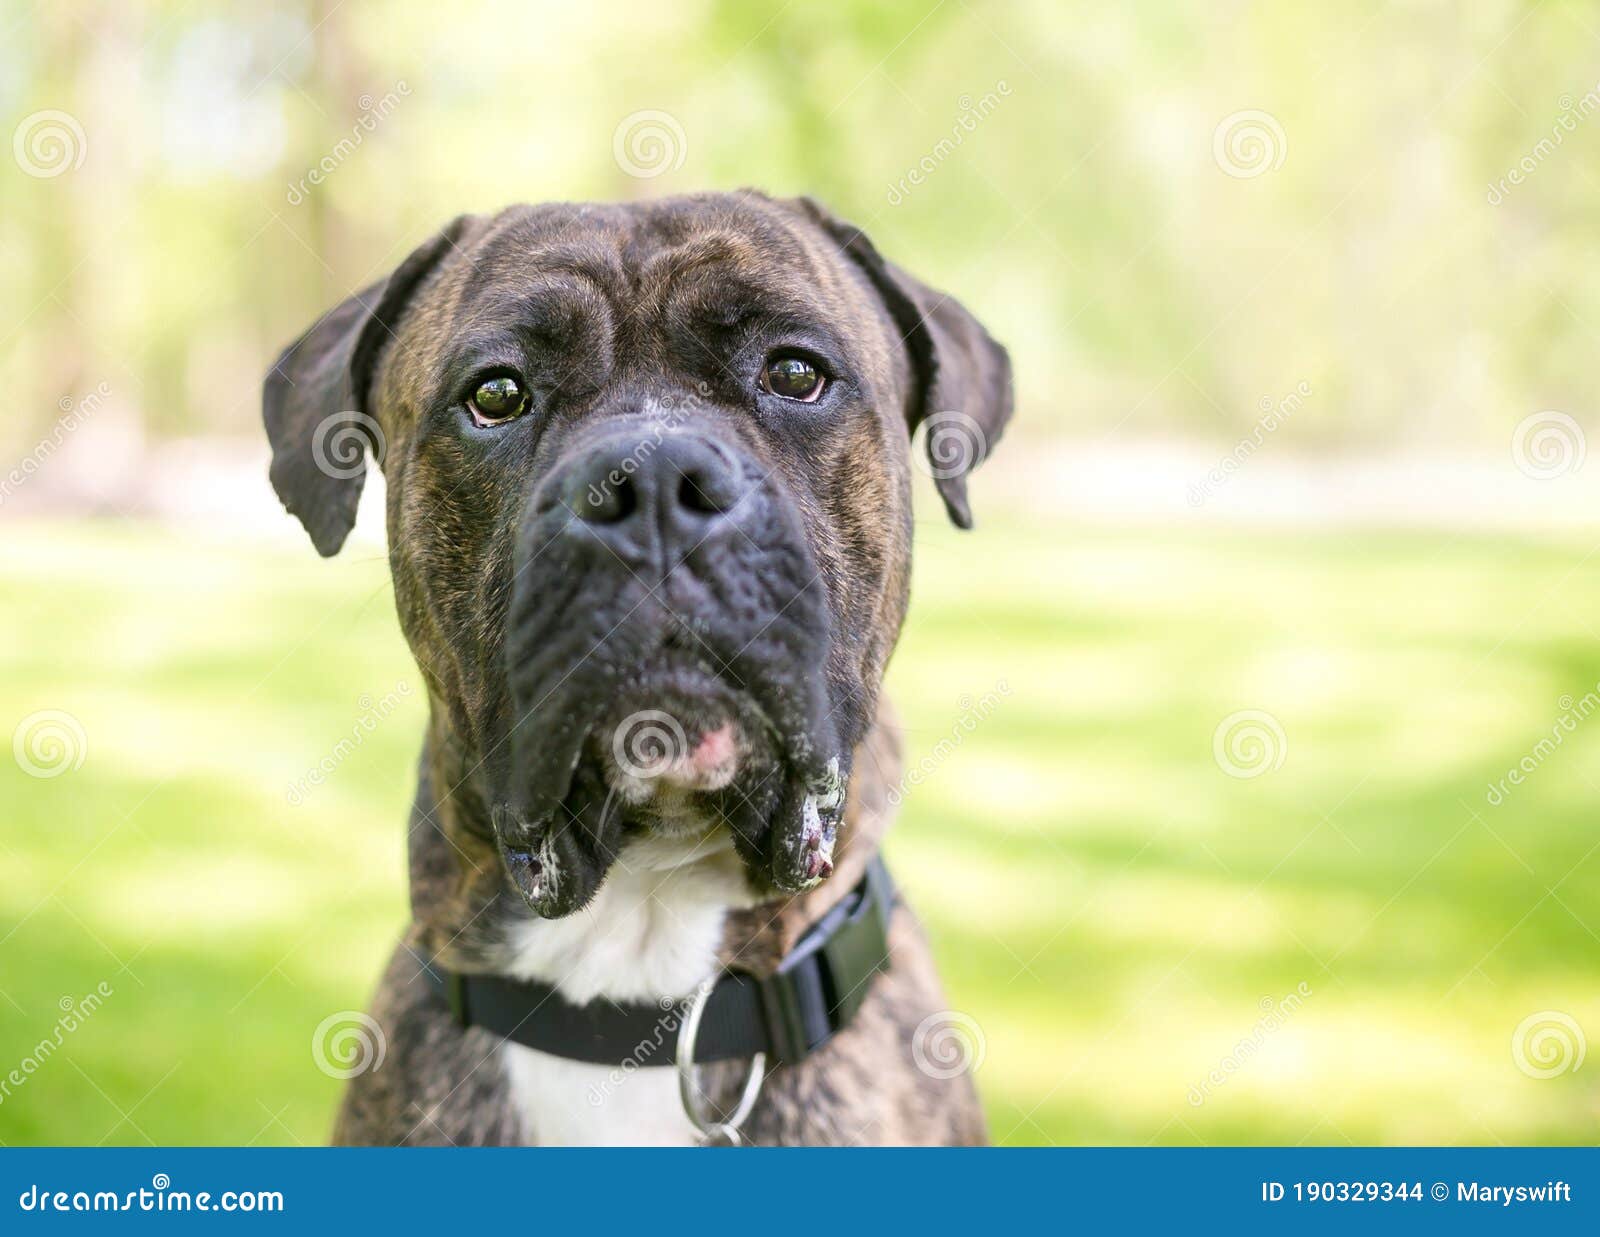 A Brindle Cane Corso American Mixed Breed Dog Photo - Image of grouchy, 190329344